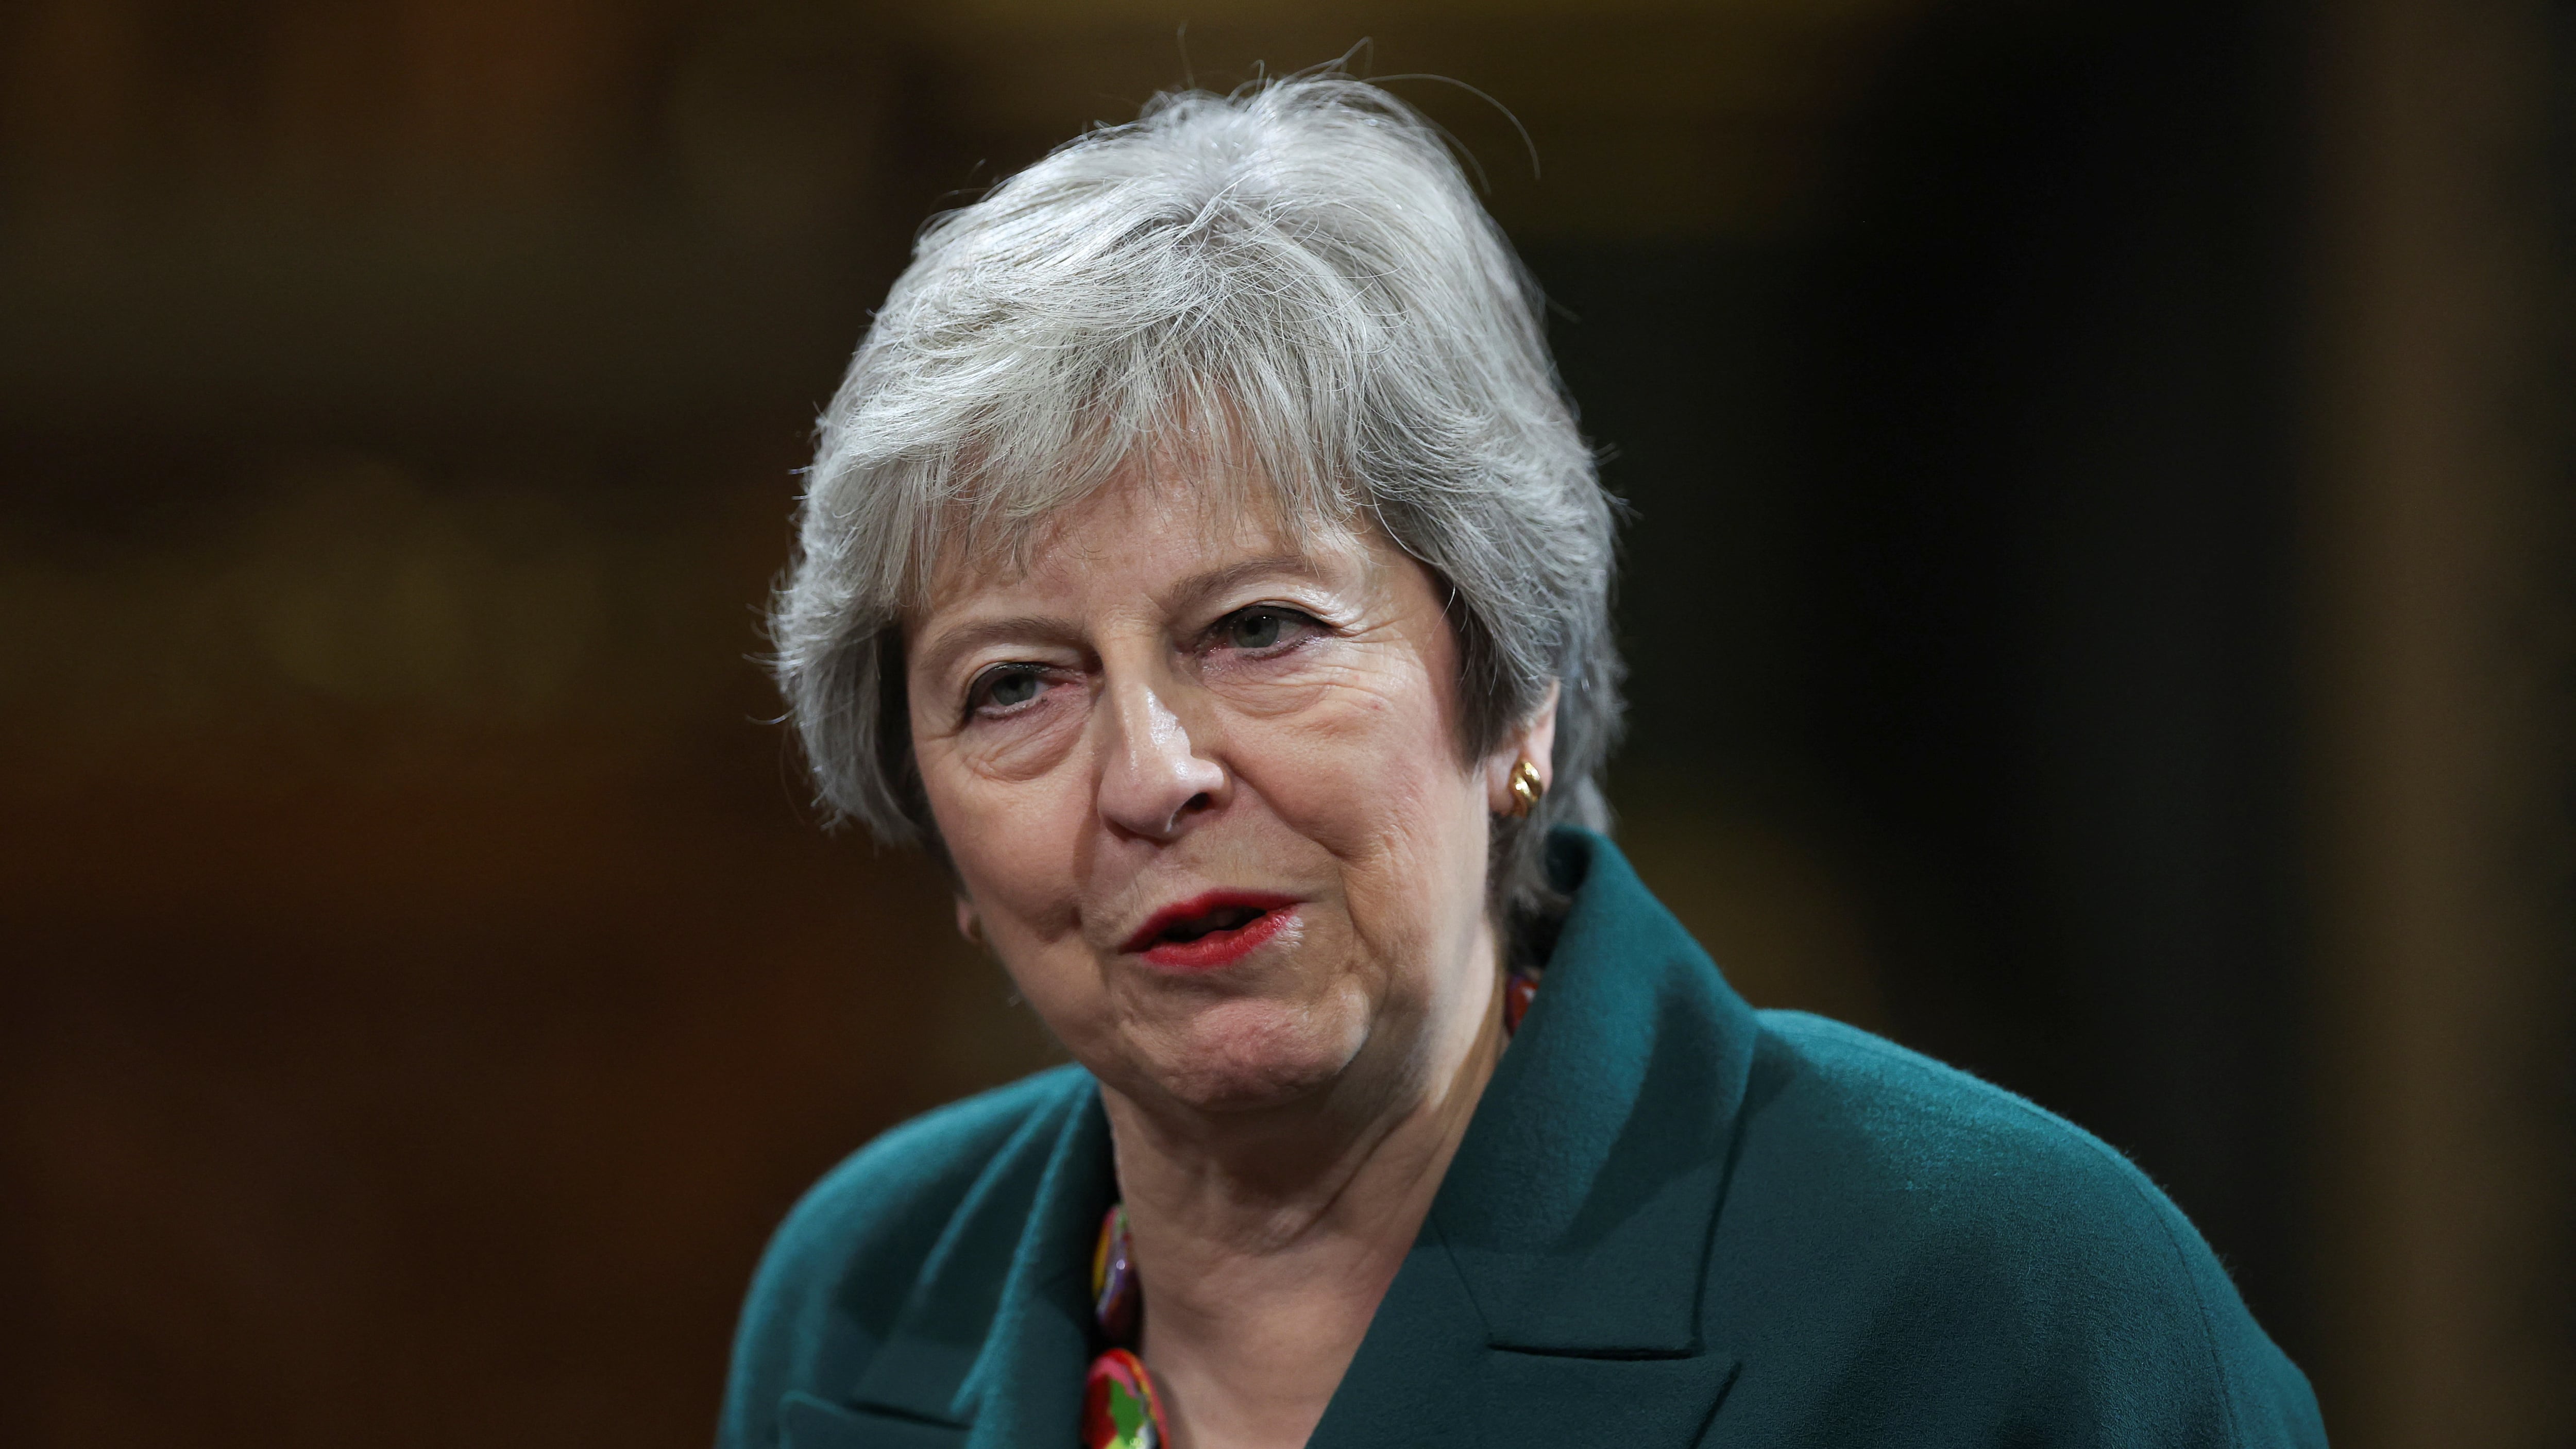 Mrs May served as prime minister between 2016 and 2019